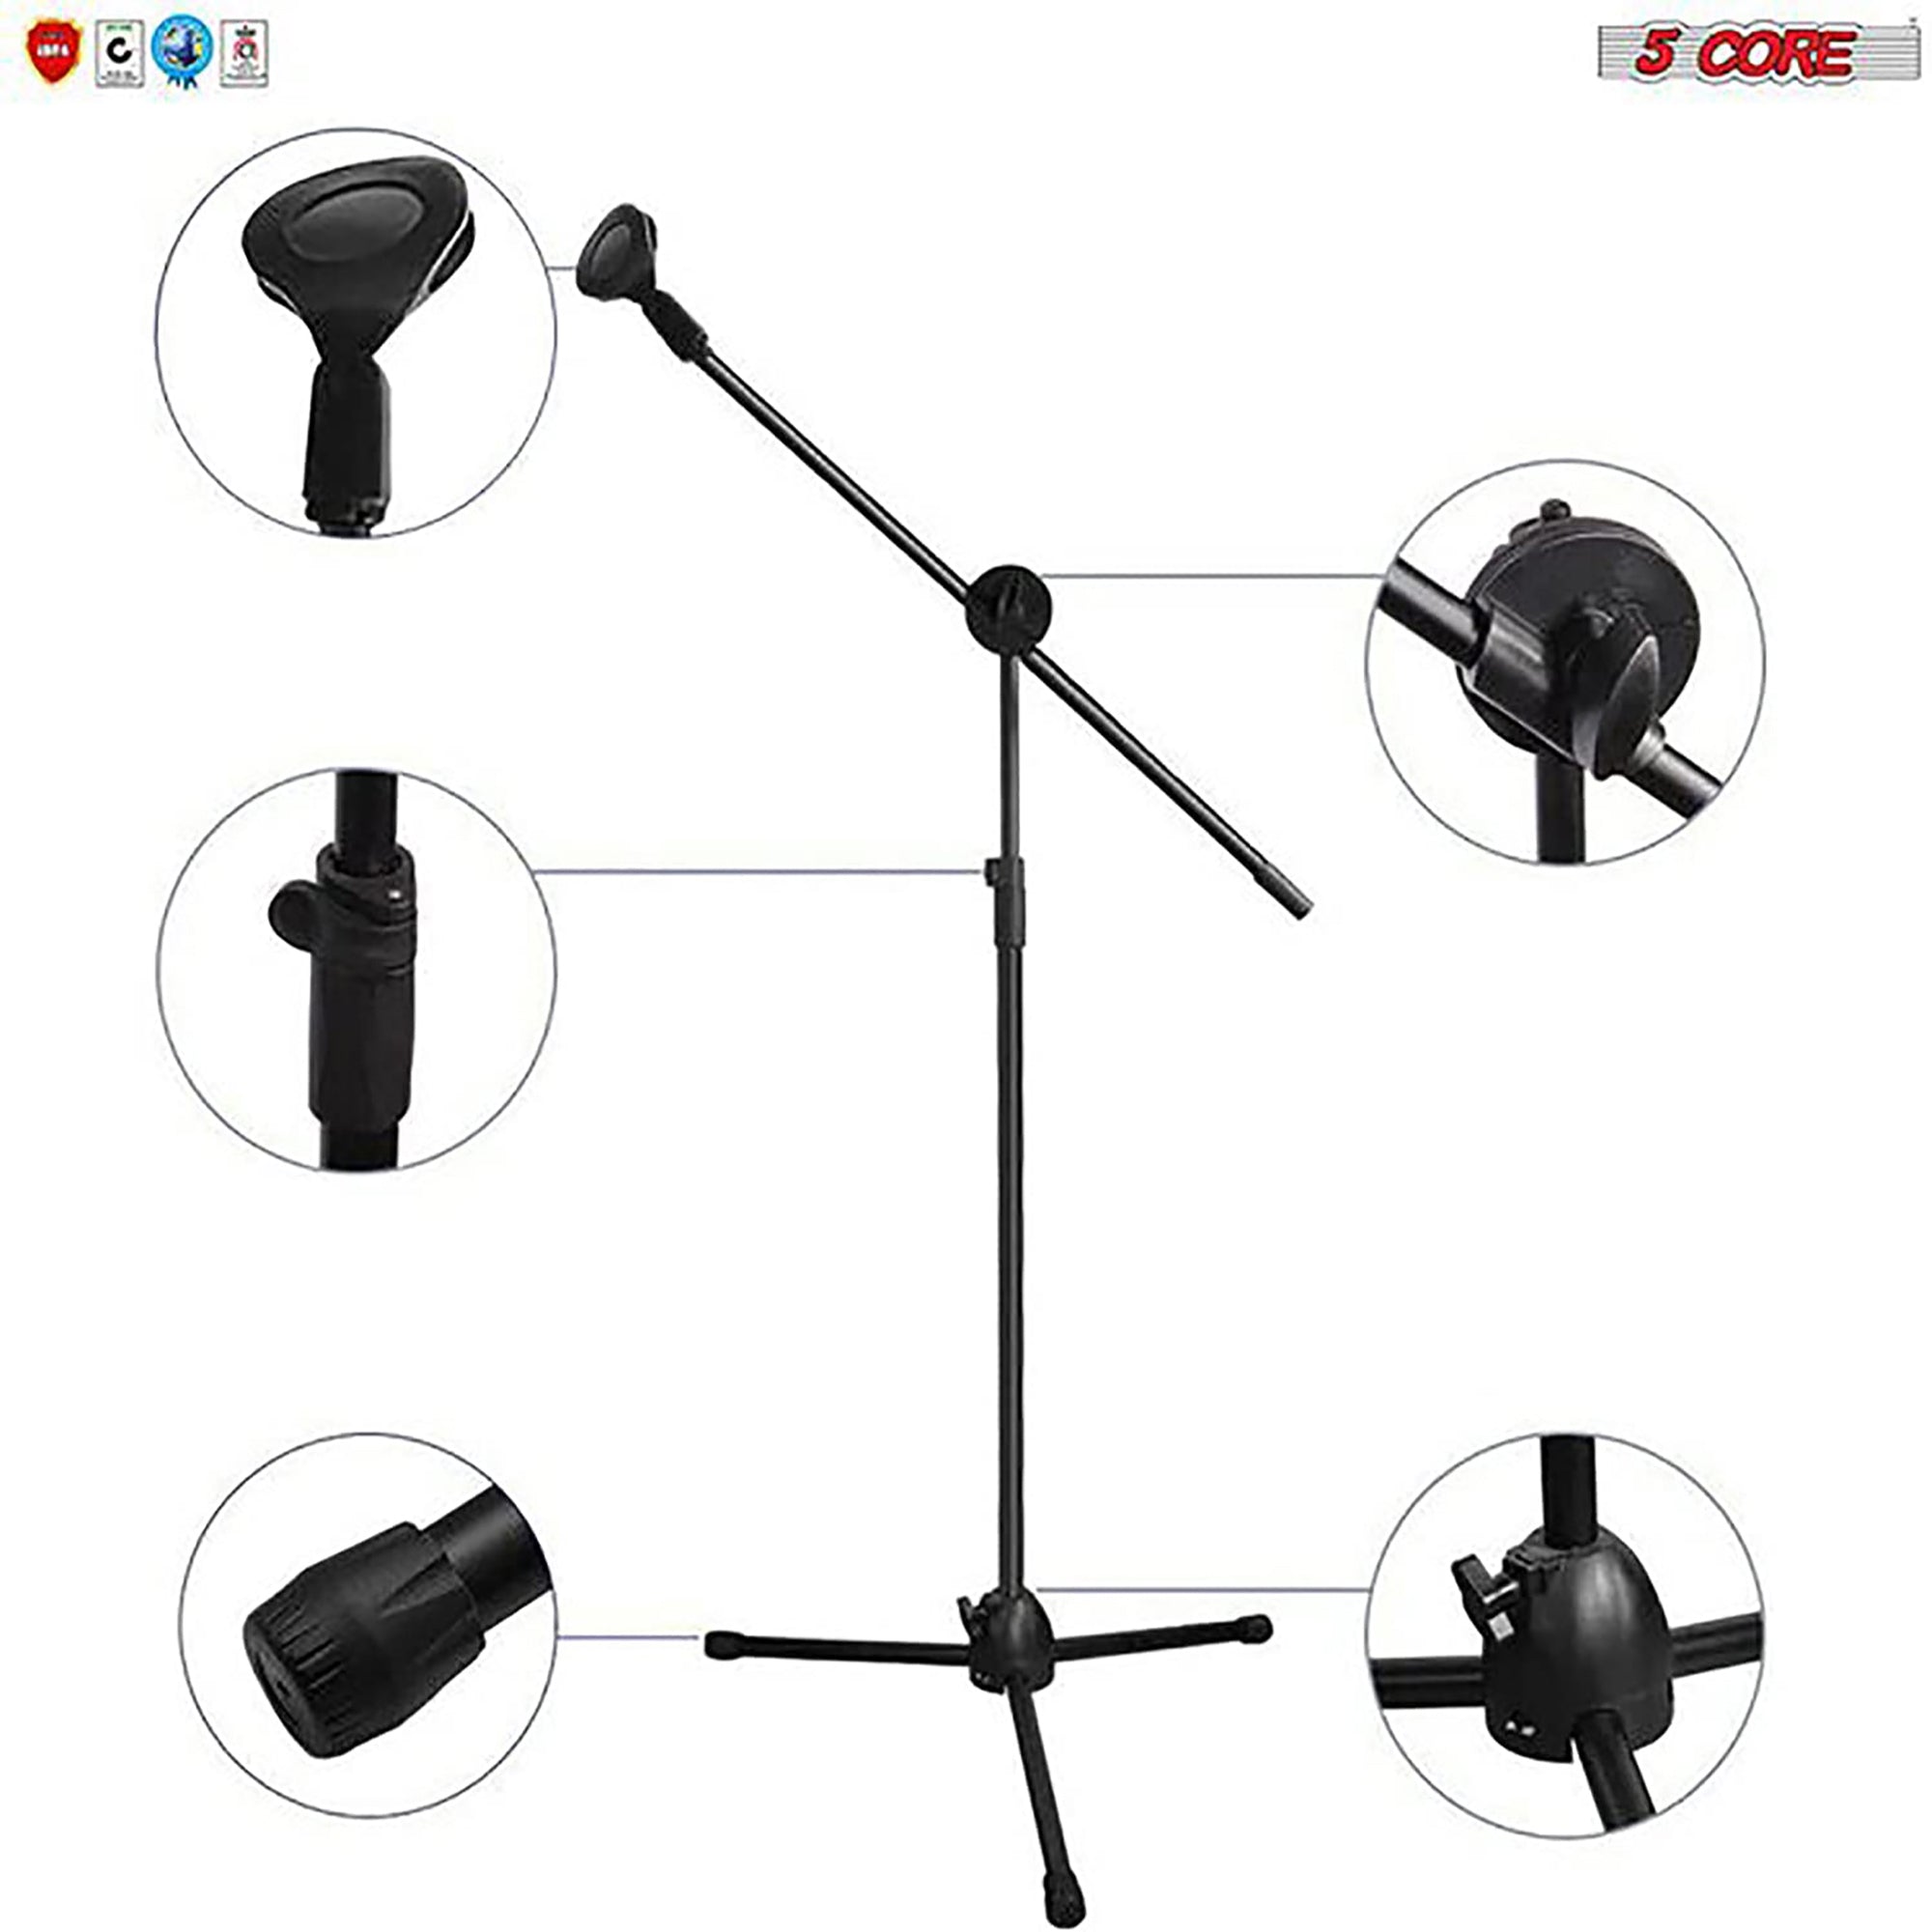 5 Core Handheld Dynamic Microphone & Low Profile Tripod Metal Stand Set • w 2 Wired Mic • XLR Cable